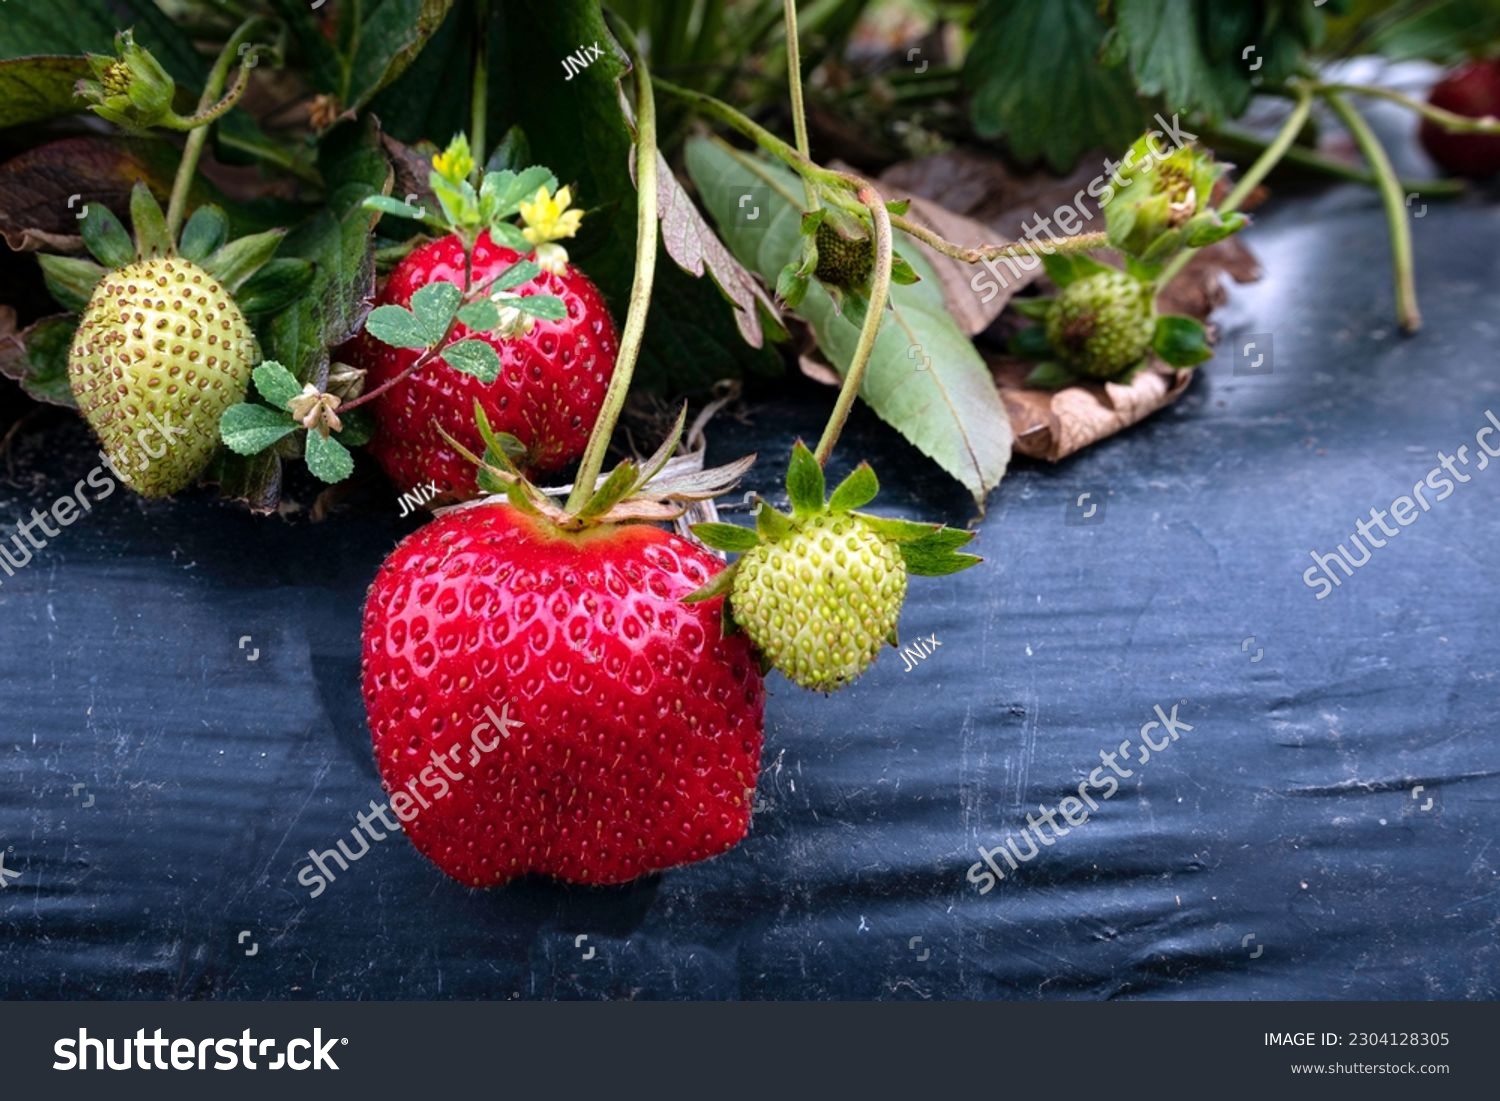 Close up of a ripe and unripe strawberries (Fragaria ananassa) growing on a raised plasticulture bed at a you-pick agritourism operation. #2304128305